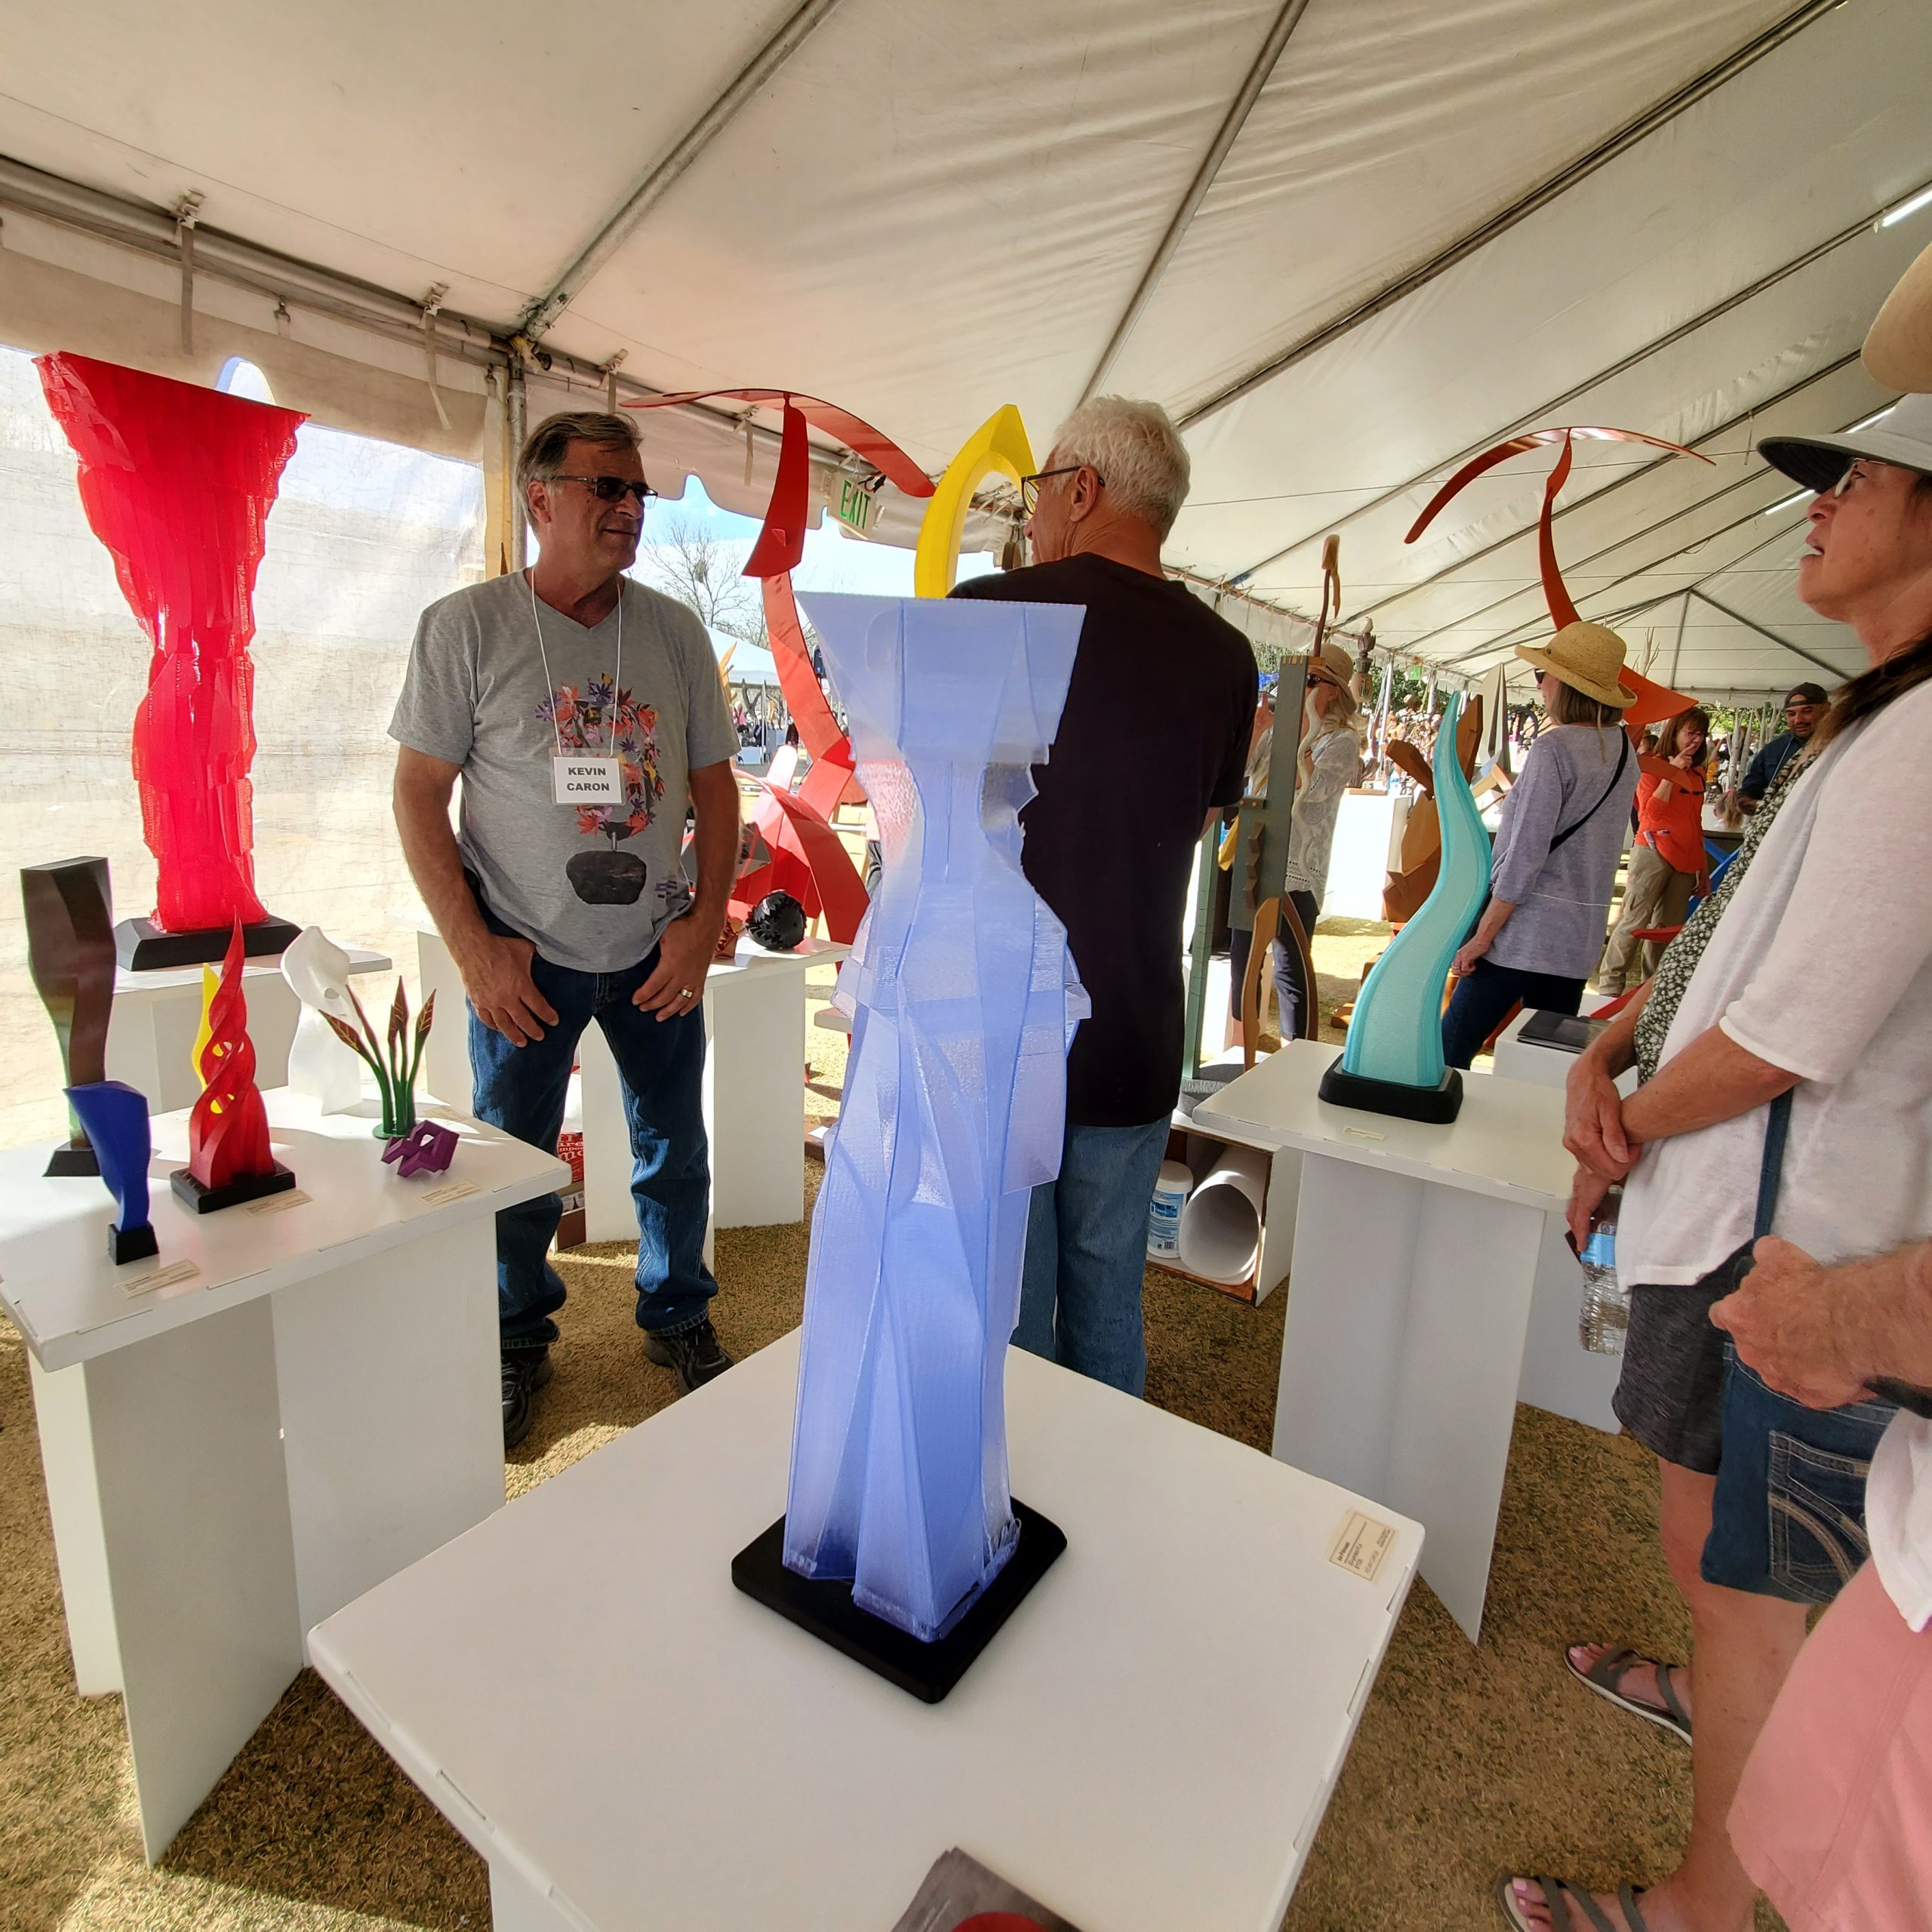 Artist Kevin Caron's booth at Sculpture Tucson 2022